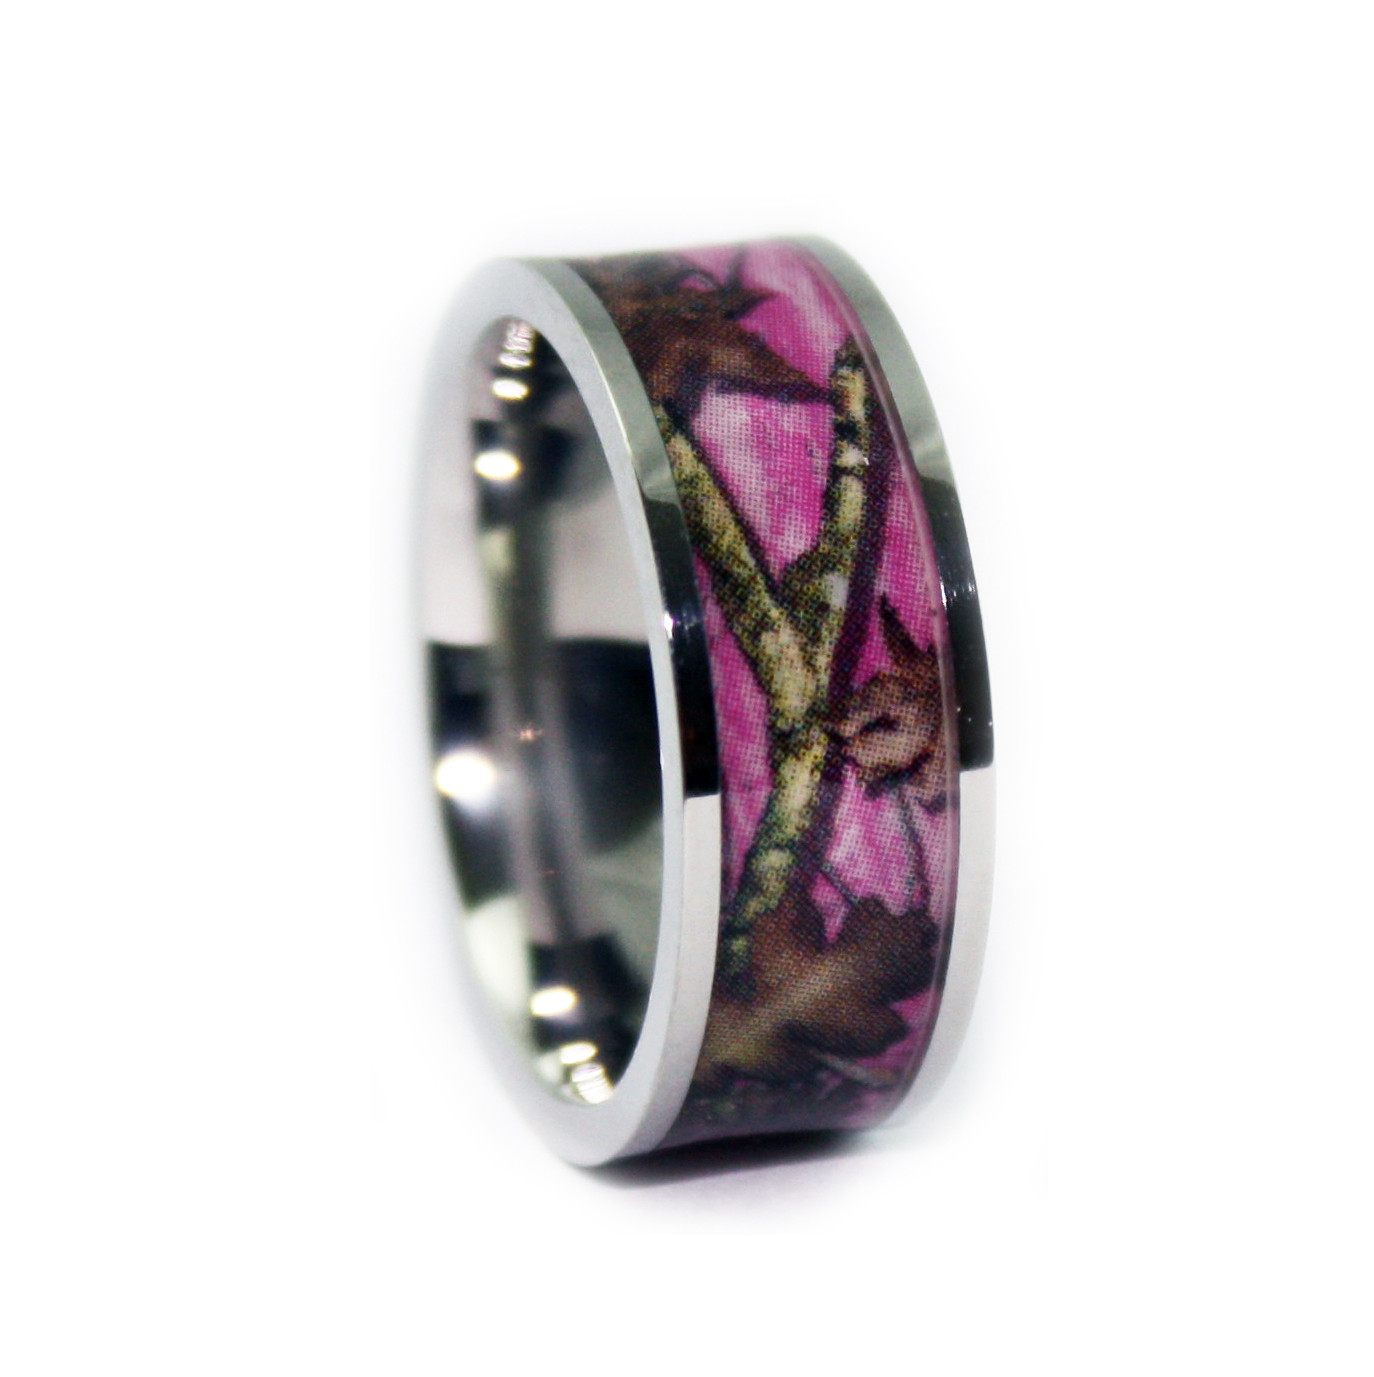 Camouflage Wedding Rings
 Pink Camo Wedding Rings Flat Titanium Camouflage Band by